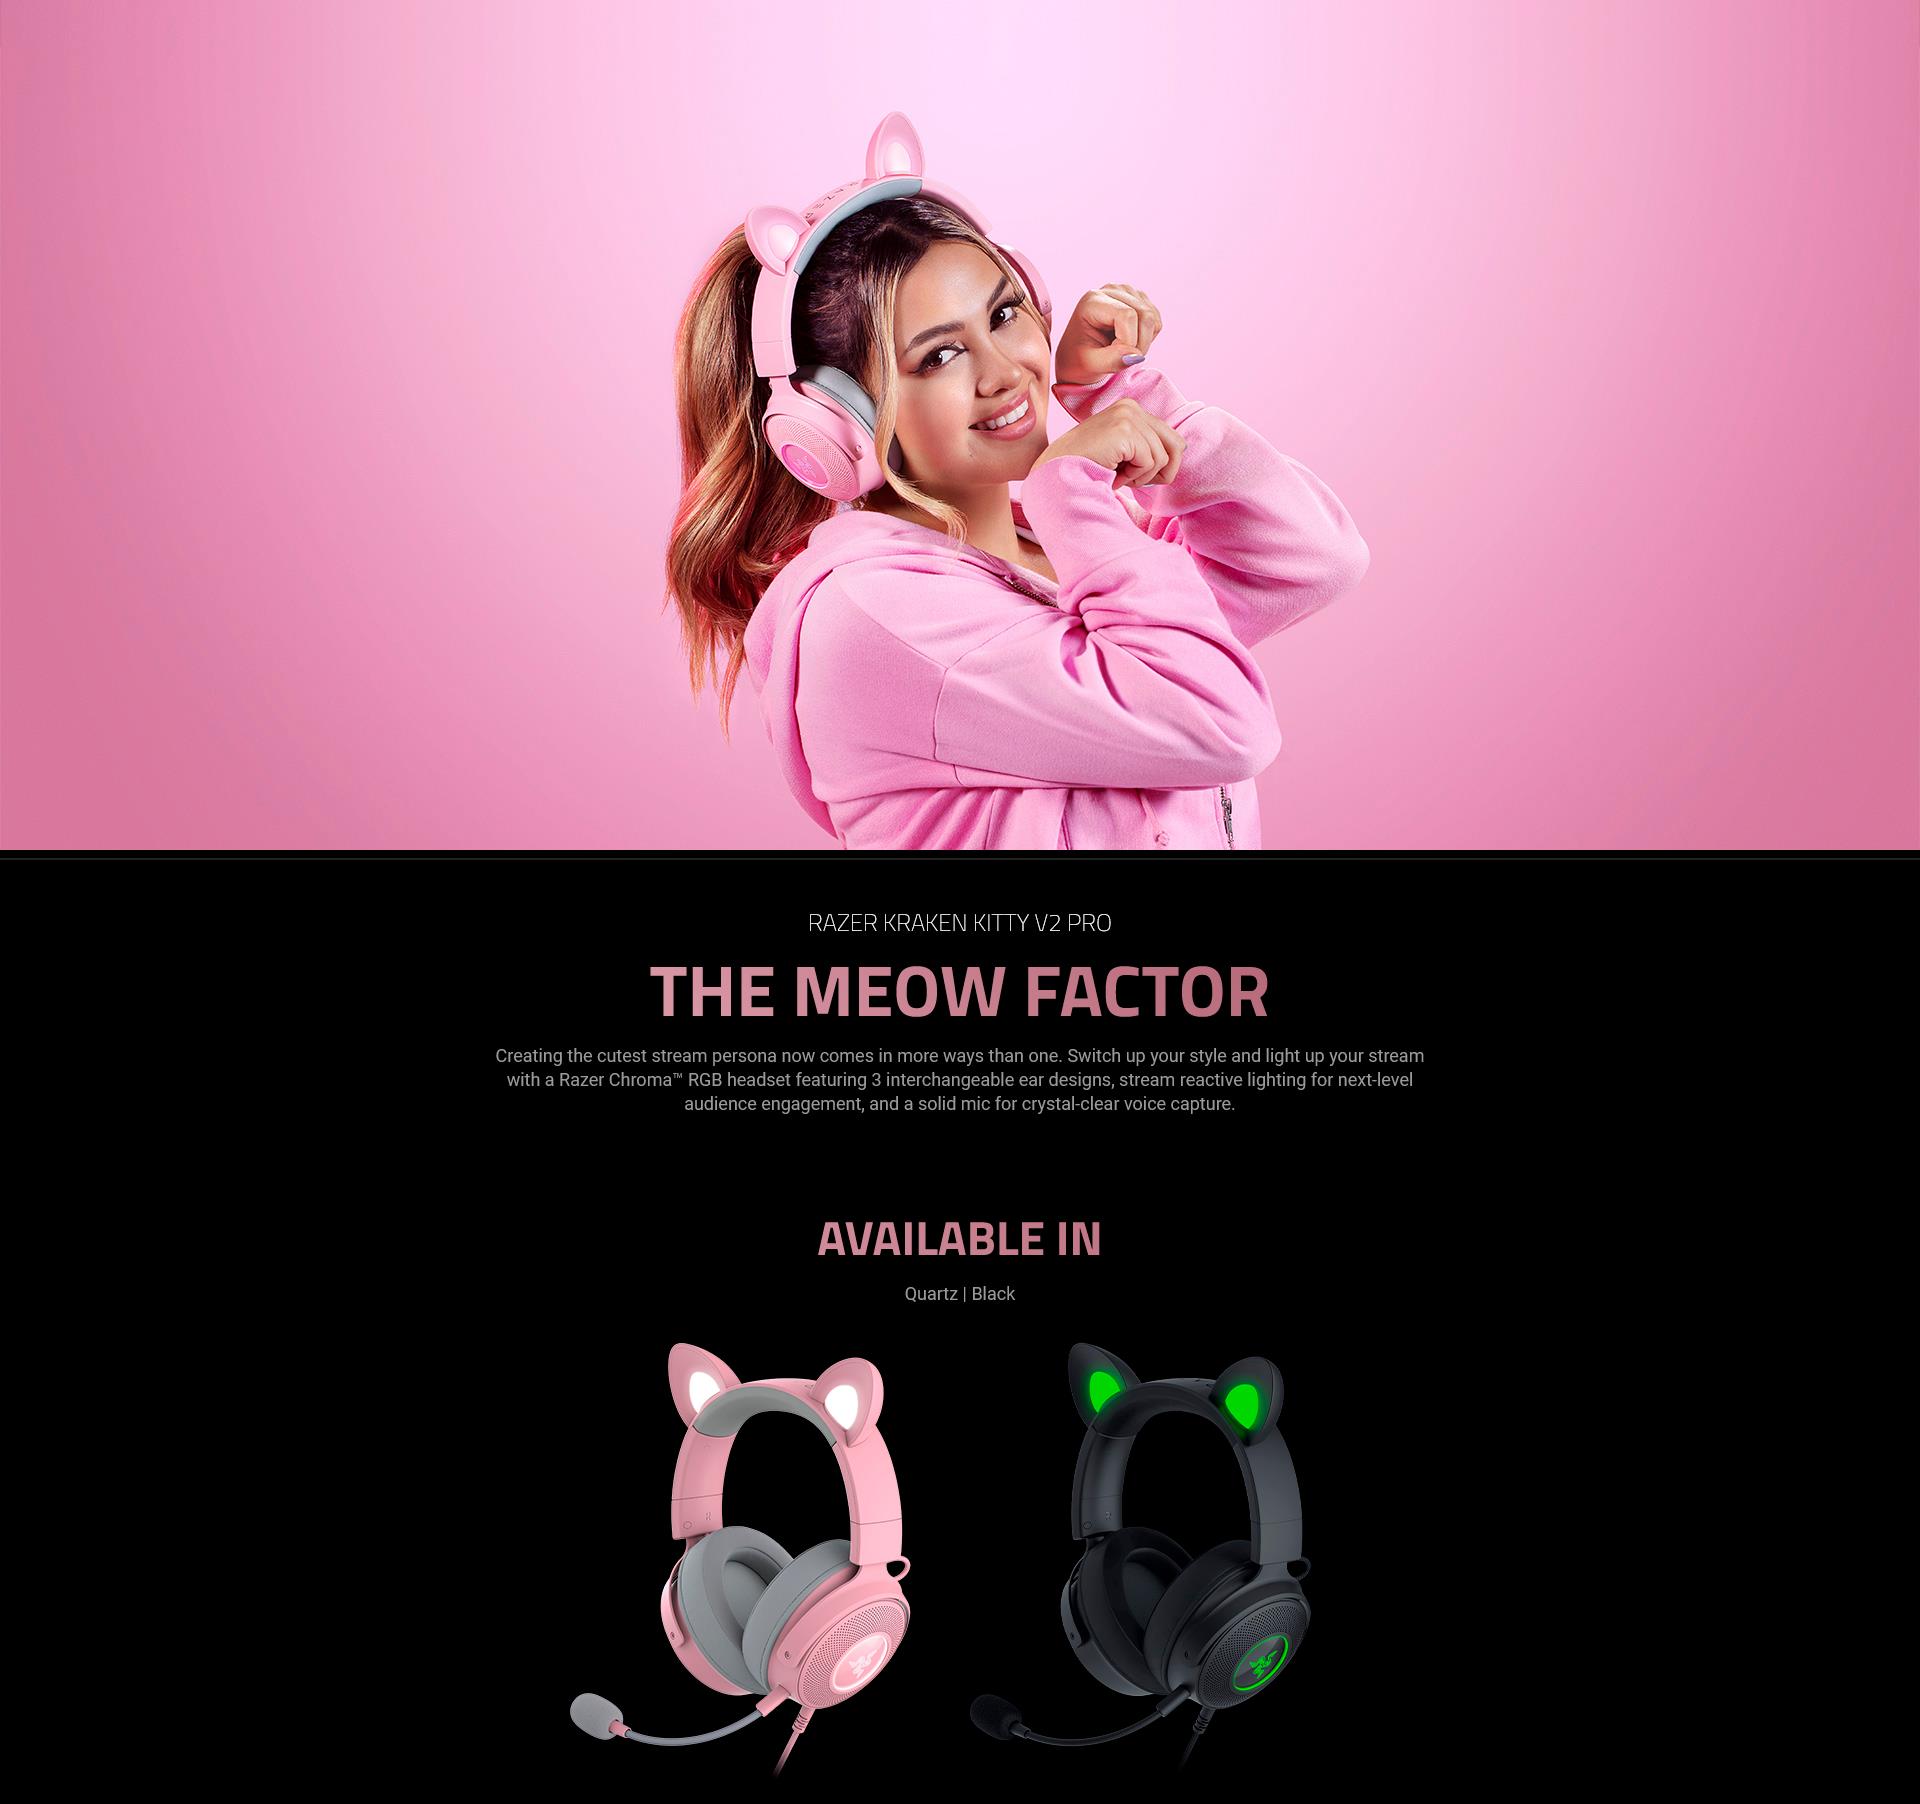 A large marketing image providing additional information about the product Razer Kraken Kitty V2 Pro - Wired RGB Headset with Interchangeable Ears (Black) - Additional alt info not provided